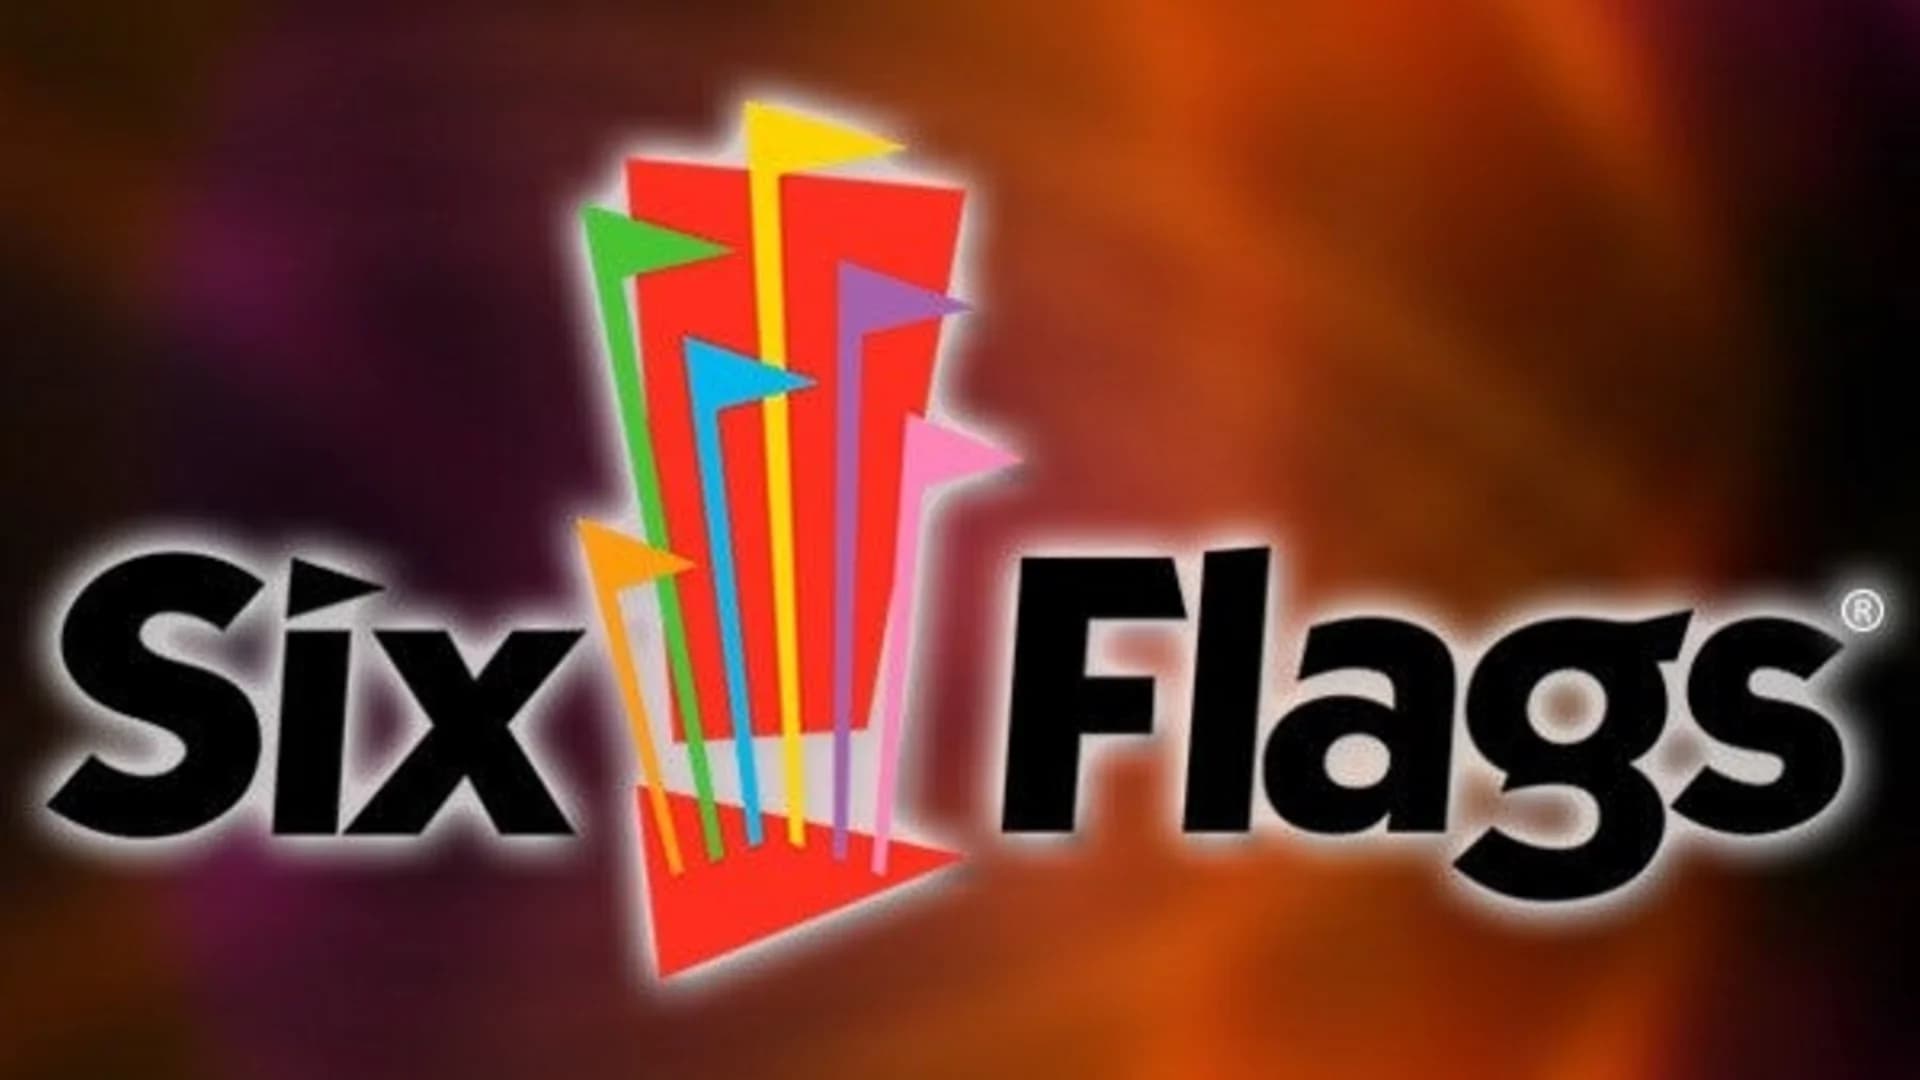 Six Flags opens this weekend with new ride billed as world's tallest pendulum ride